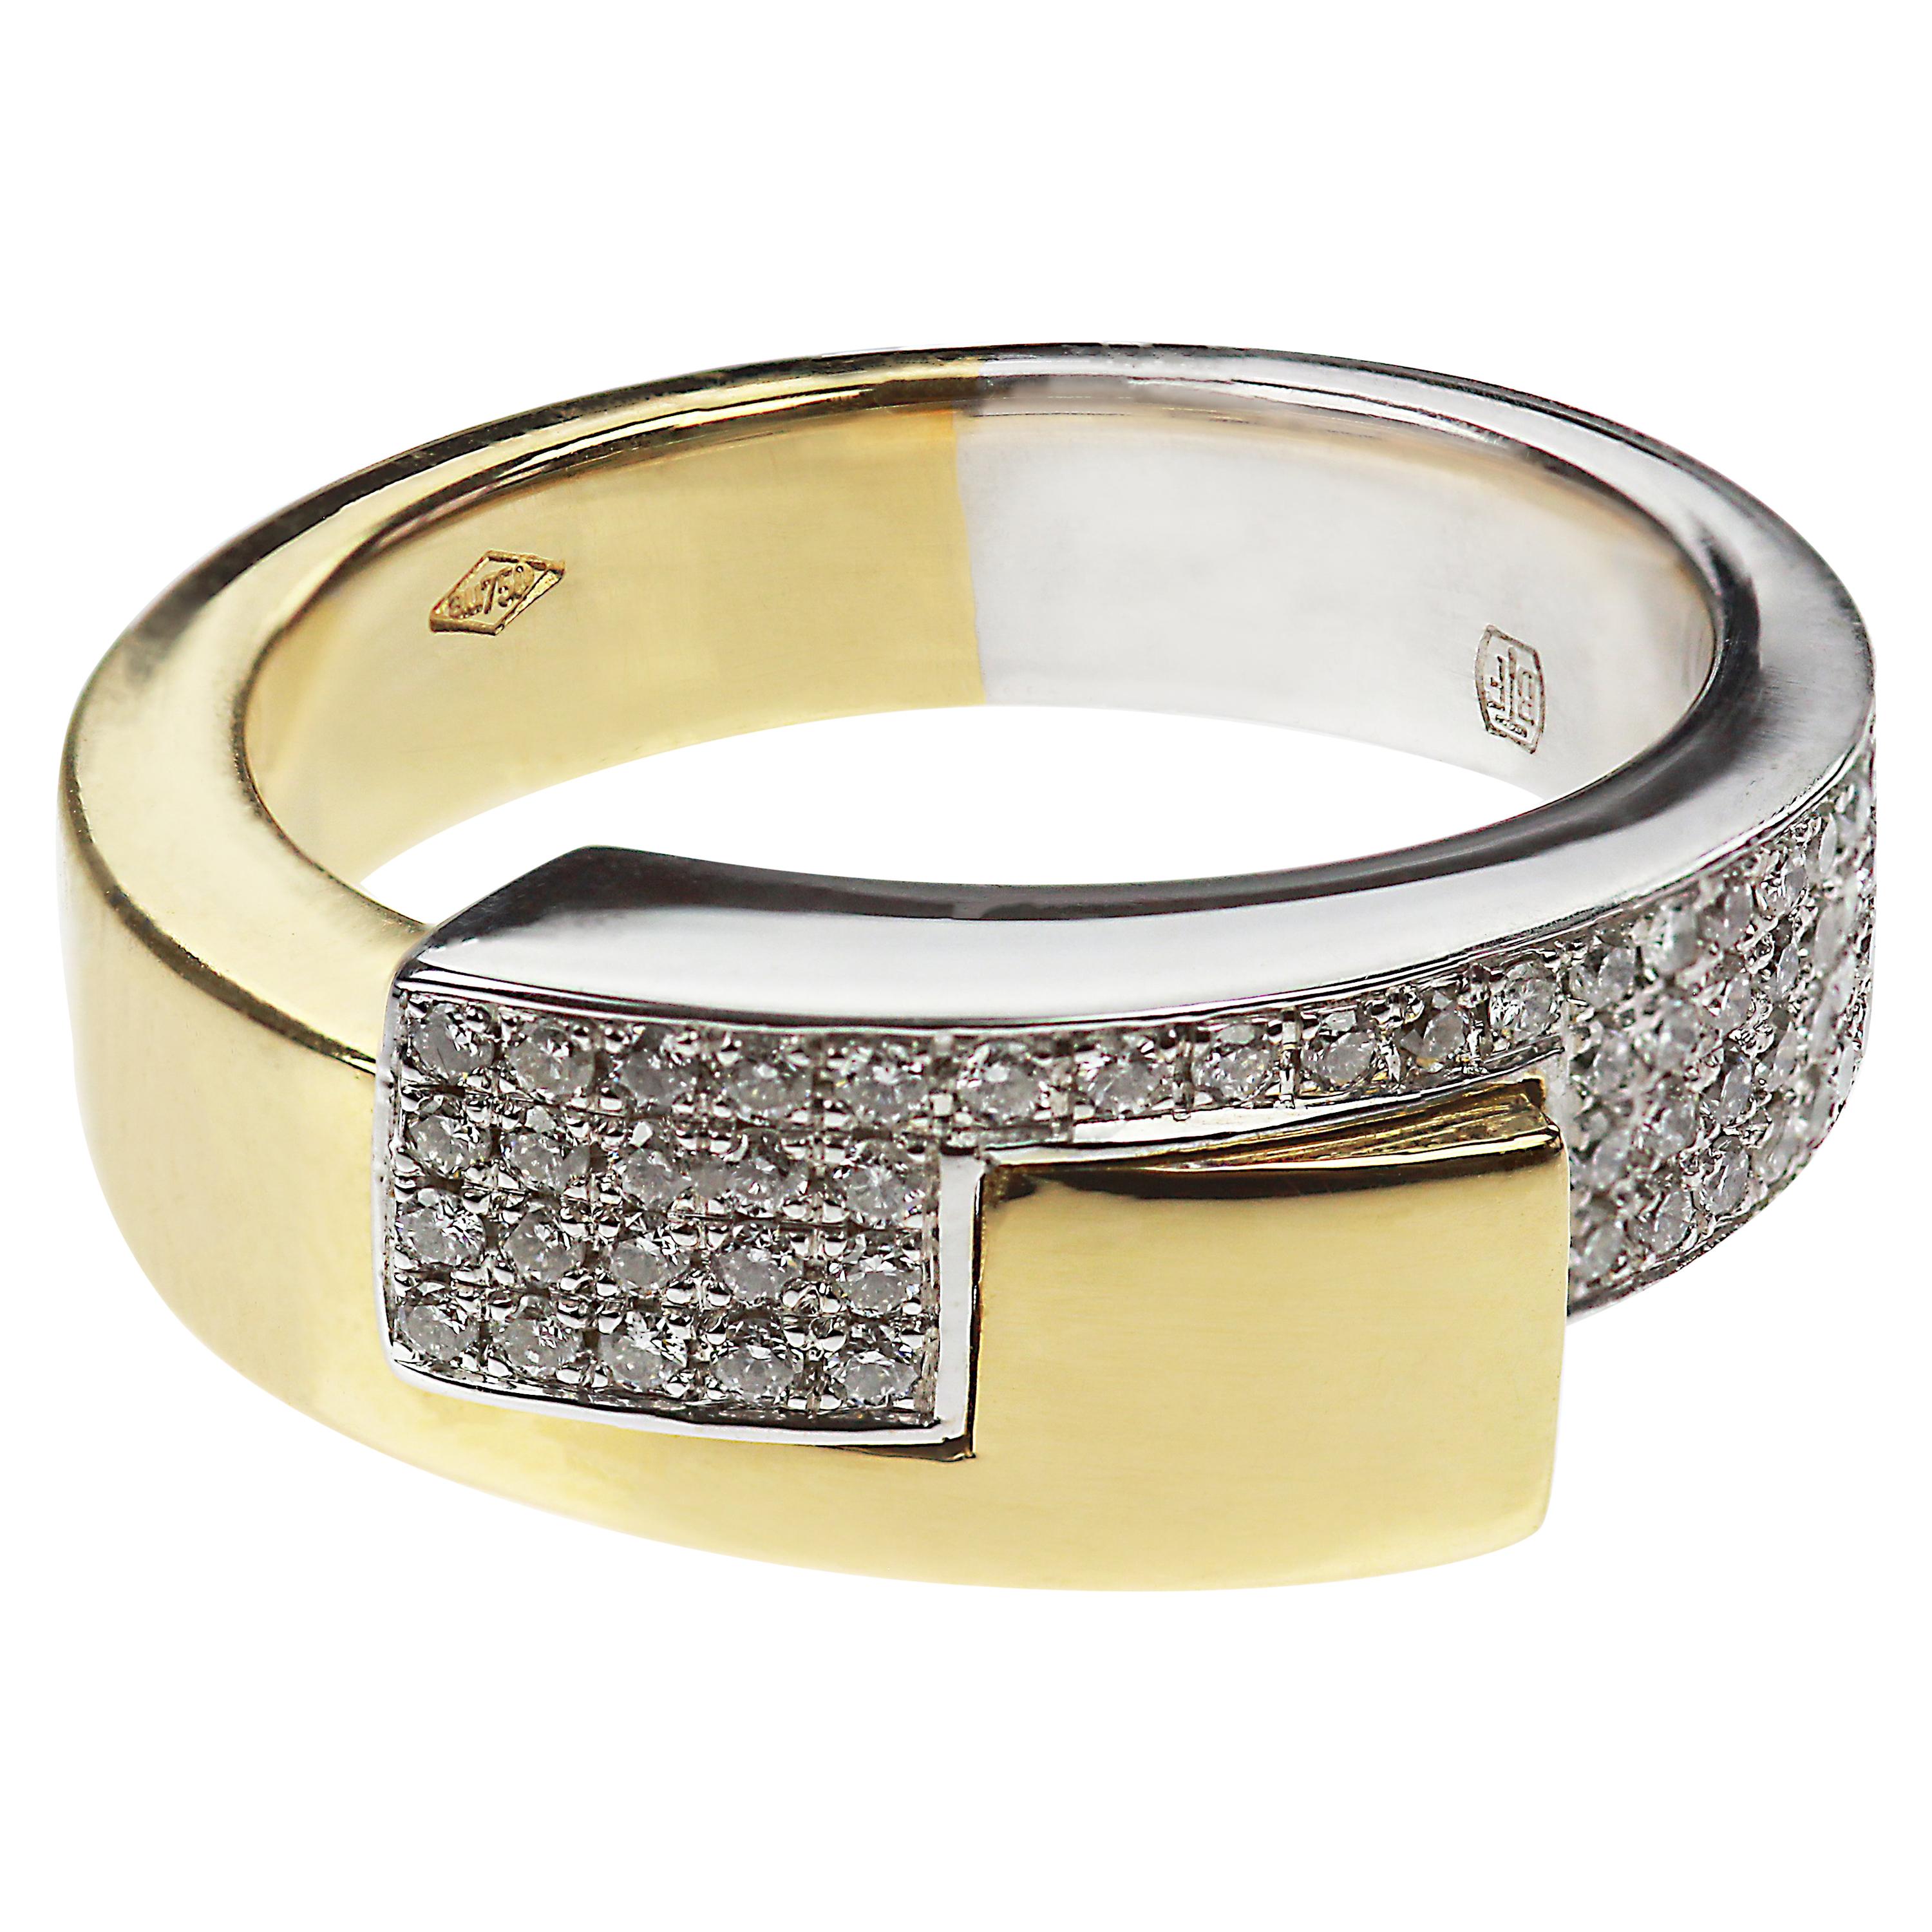 French Diamond Ring in 18 Carat Yellow and White Gold